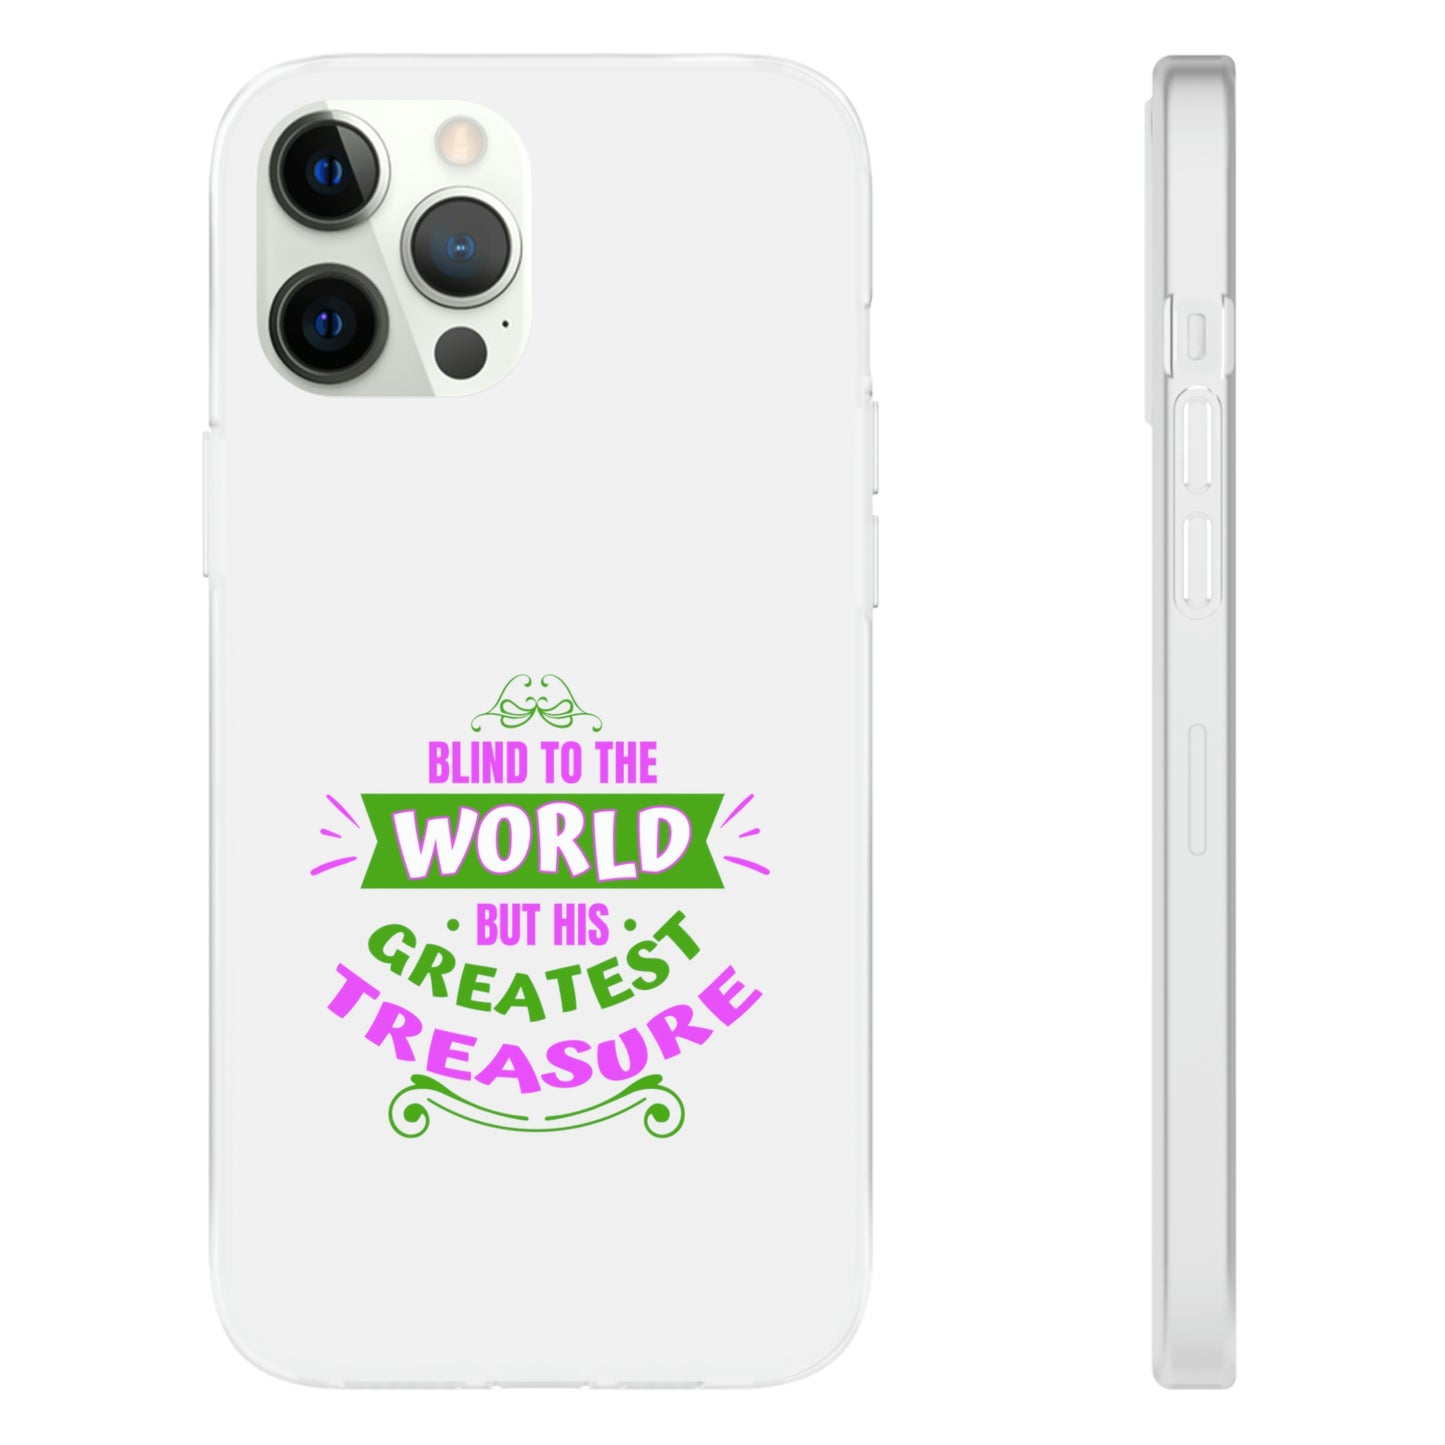 Blind To The World But His Greatest Treasure Flexi Phone Case